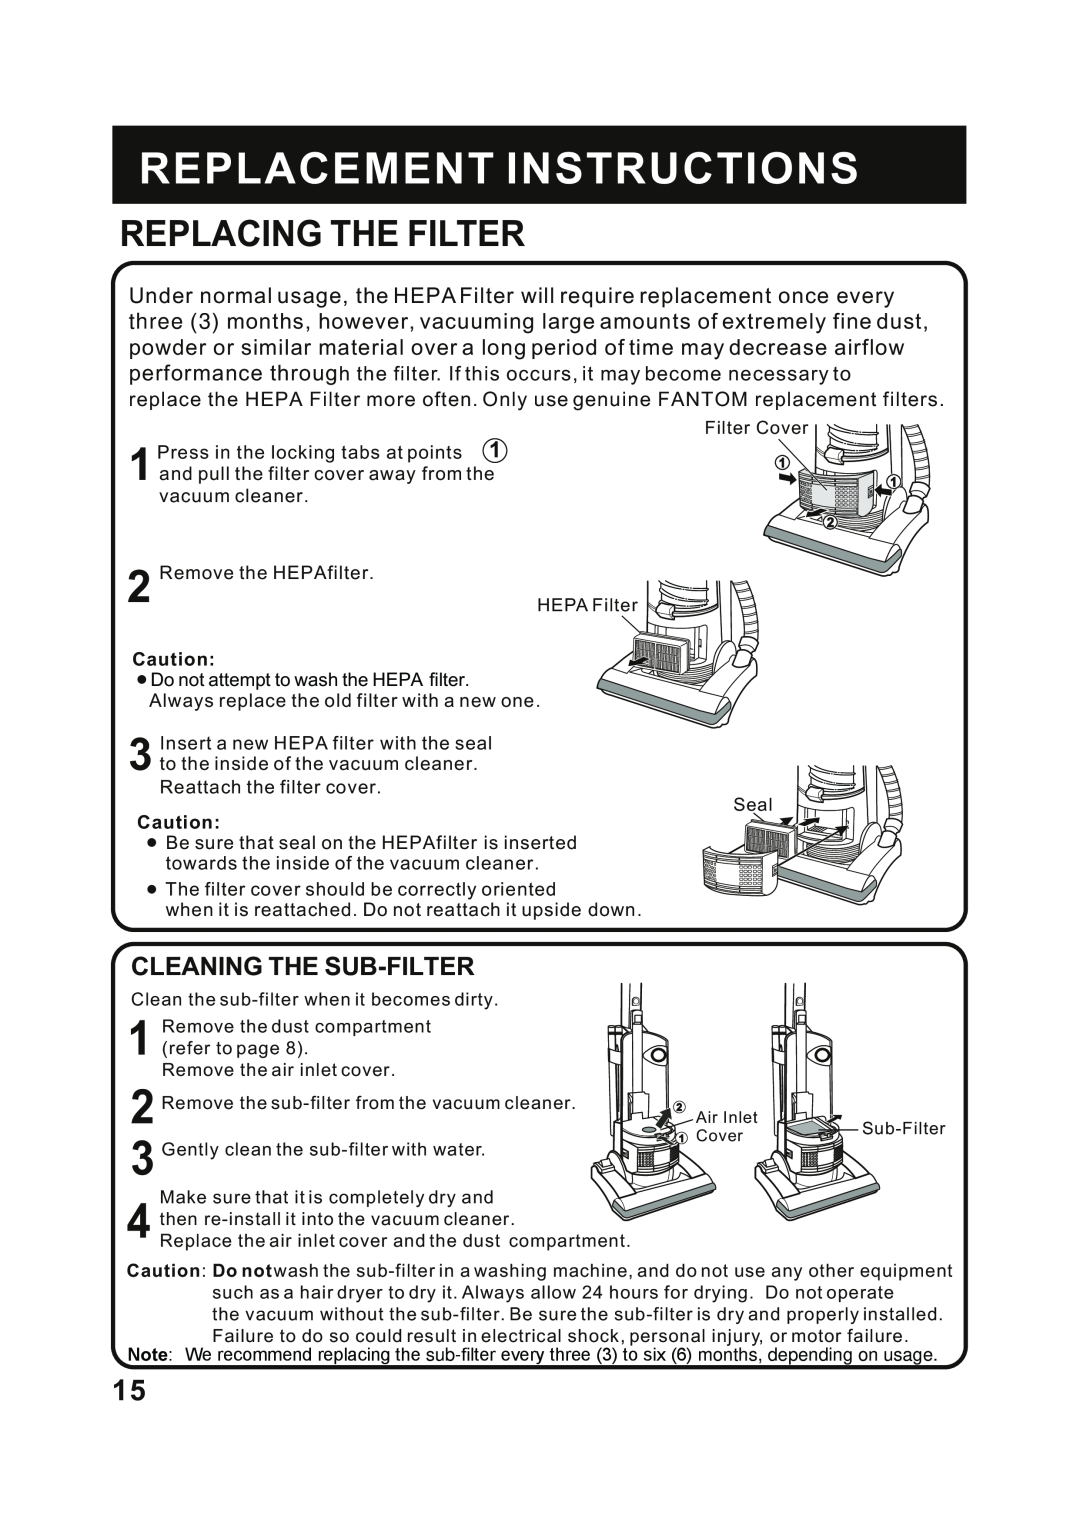 Fantom Vacuum FM741HR instruction manual Replacing The Filter, Cleaning The Sub-Filter, Replacement Instructions 